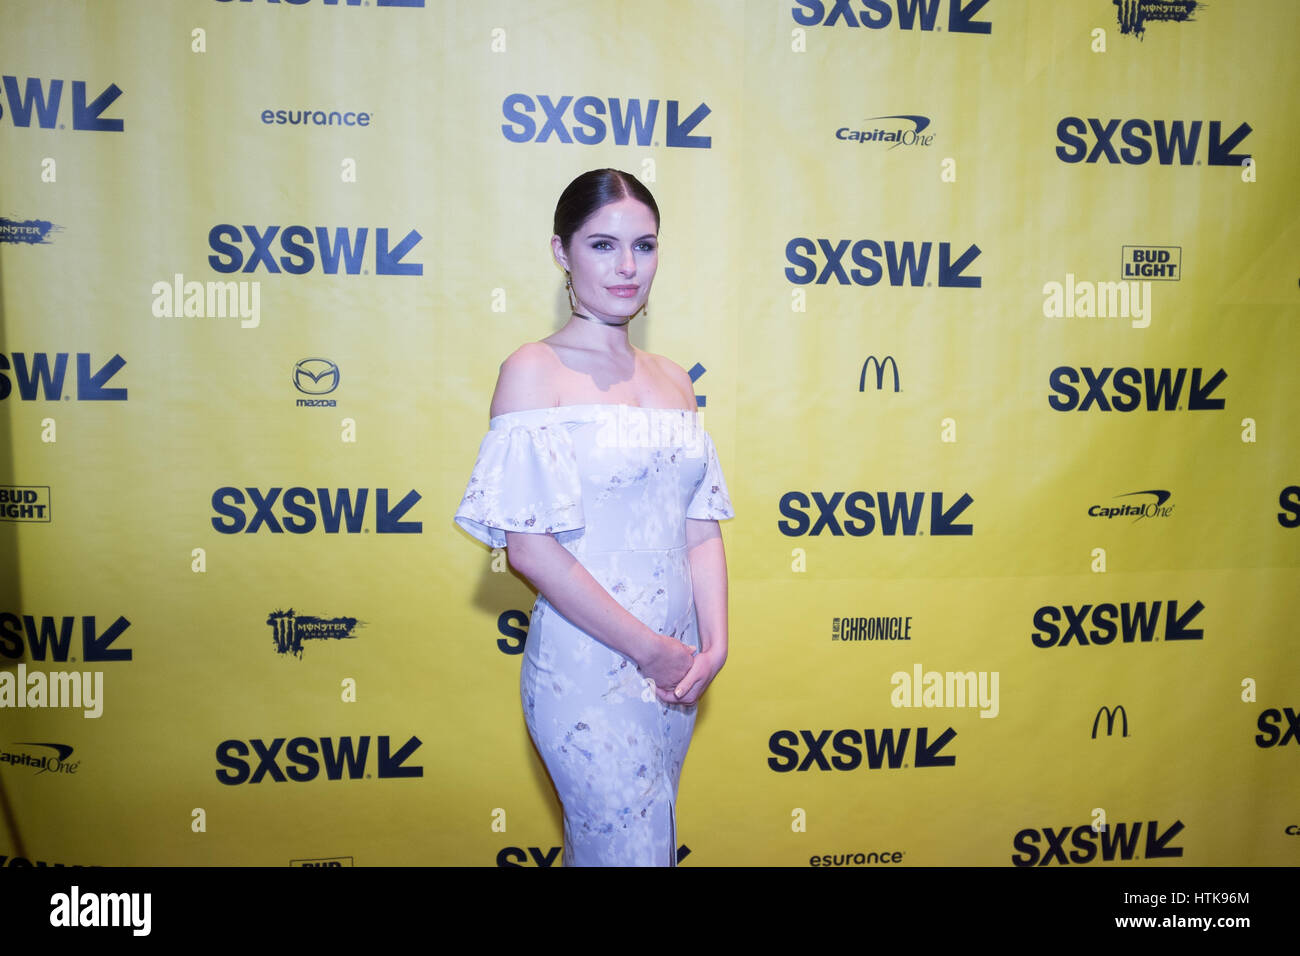 Austin, Texas, USA. Austin, Texas, USA. 12th March 2017. OLIVIA APPLEGATE attends world premiere of the Honor Farm at the Stateside Theater during SXSW Austin, Texas Credit: Sandy Carson/ZUMA Wire/Alamy Live News Stock Photo